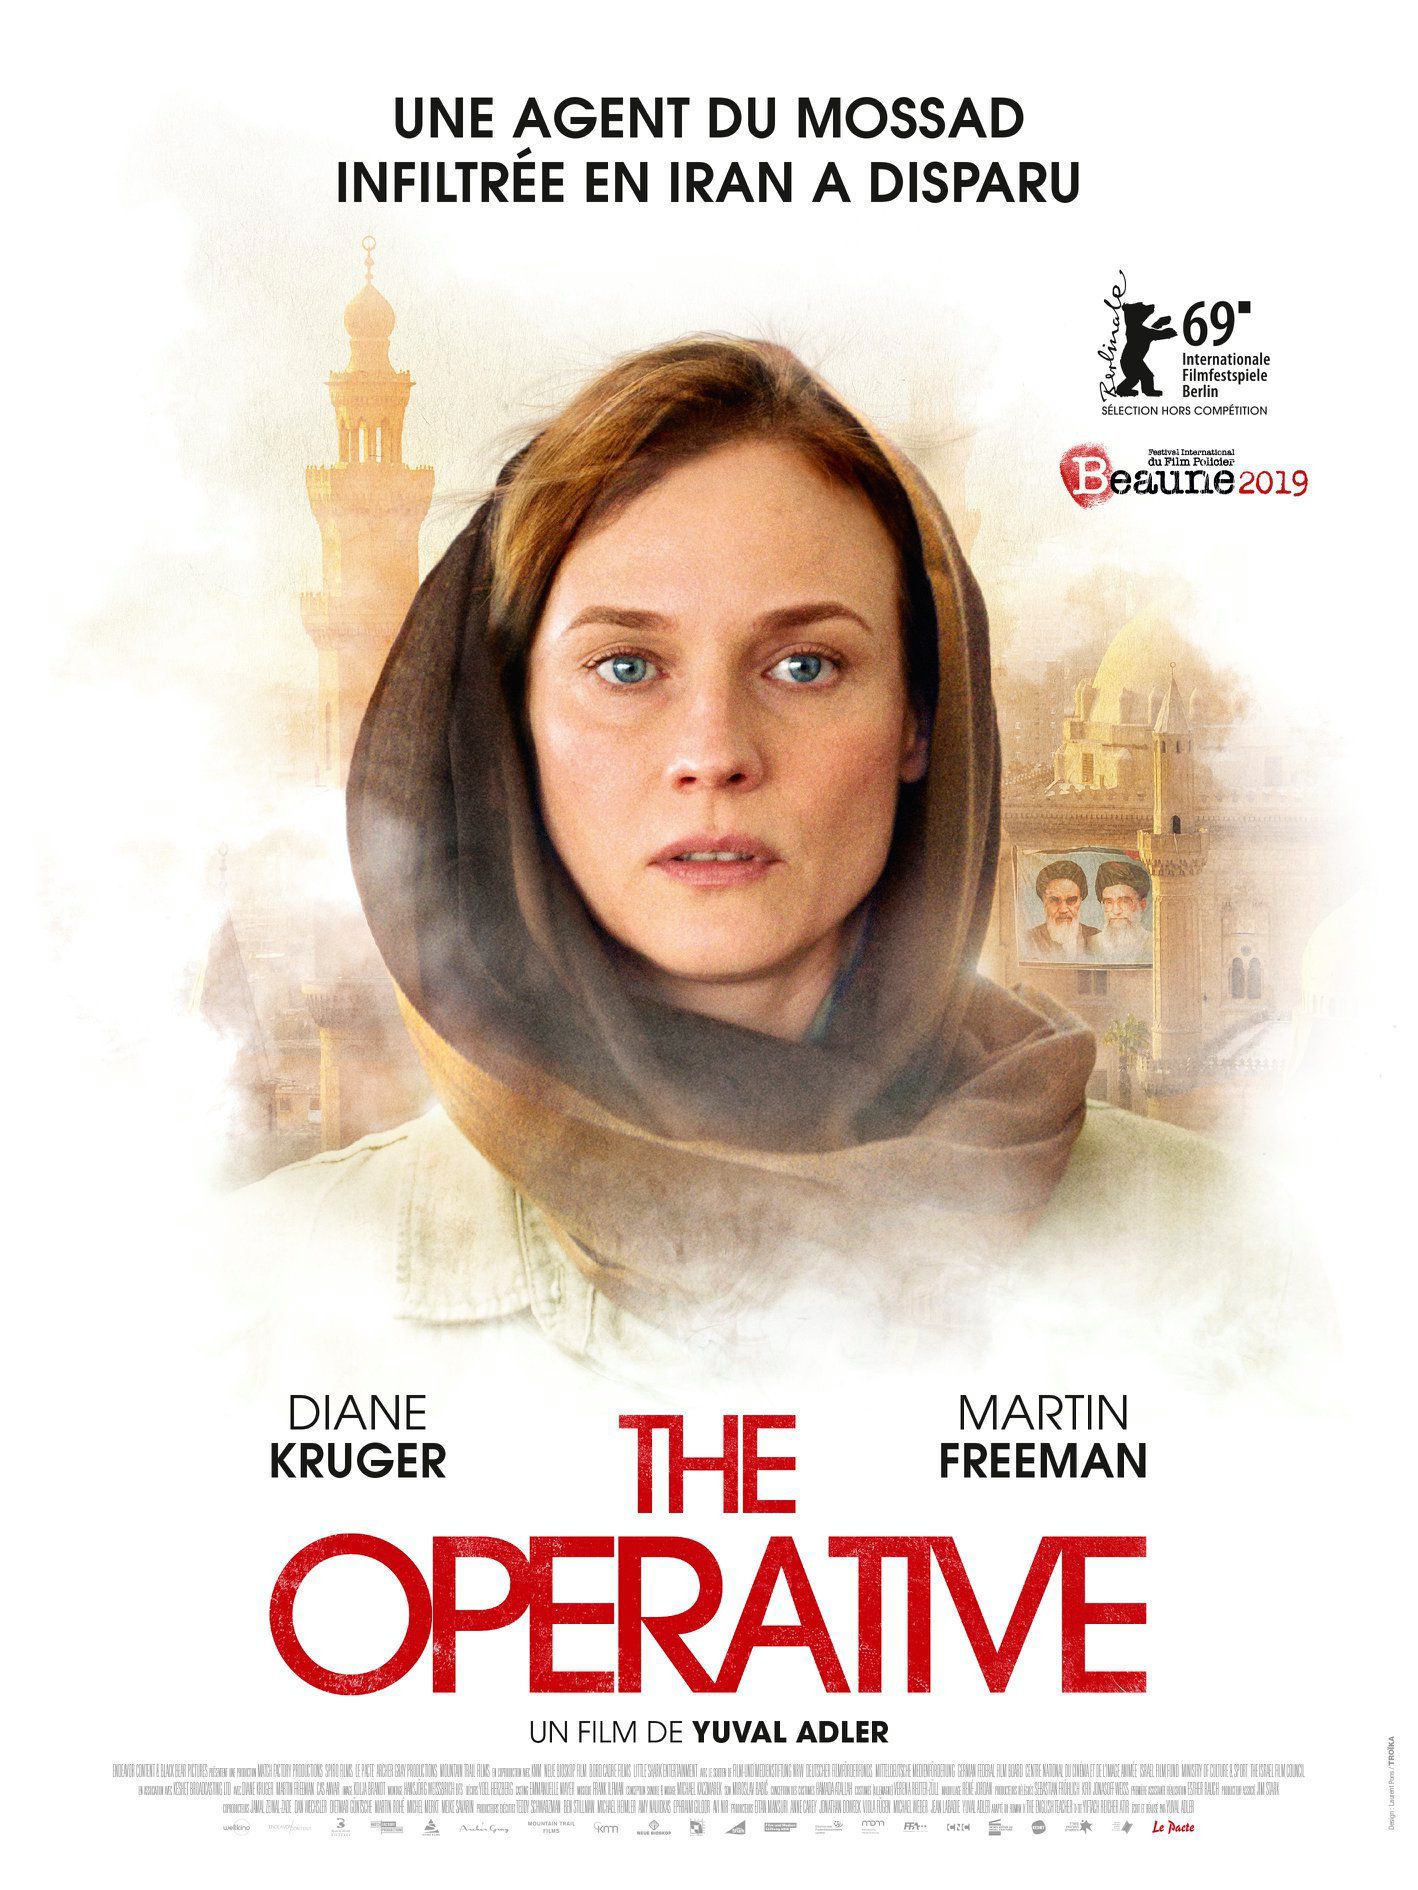 The Operative - Film (2019) streaming VF gratuit complet